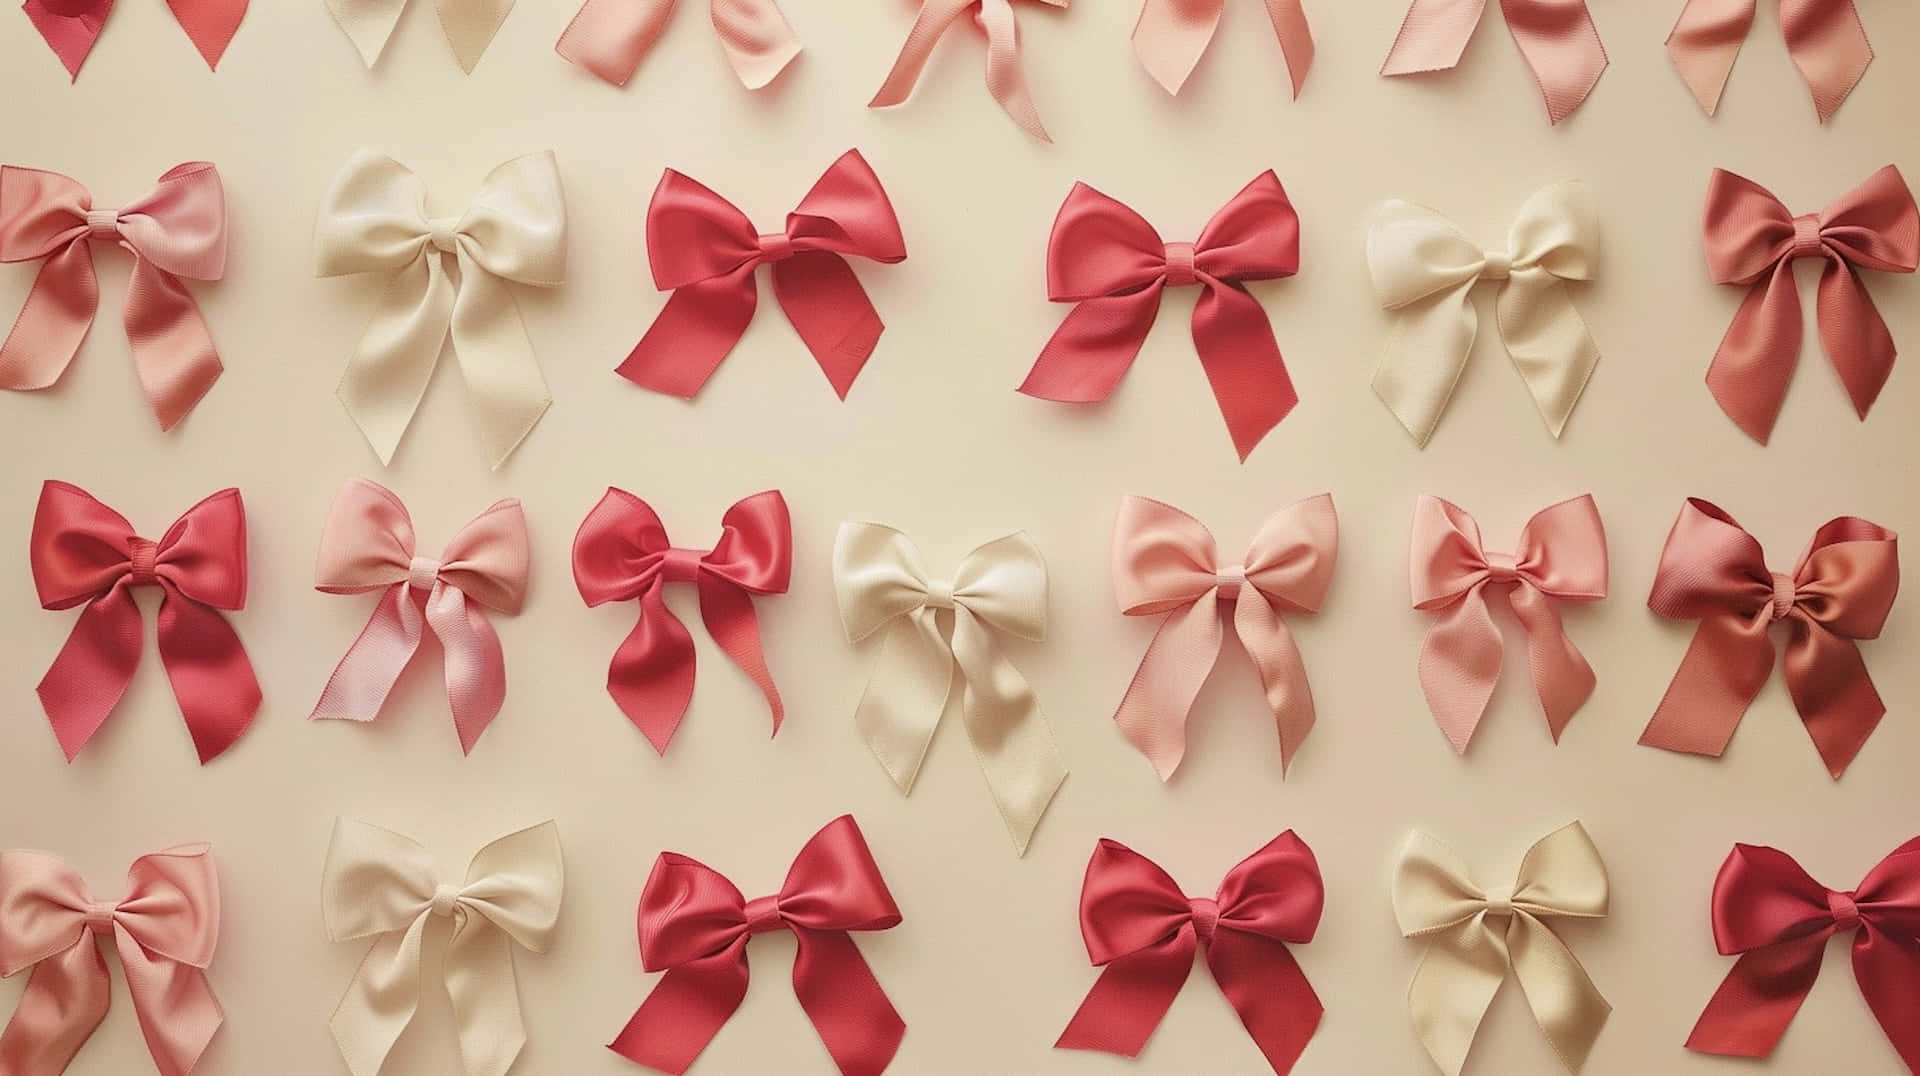 Assorted Satin Ribbon Bows Background Wallpaper